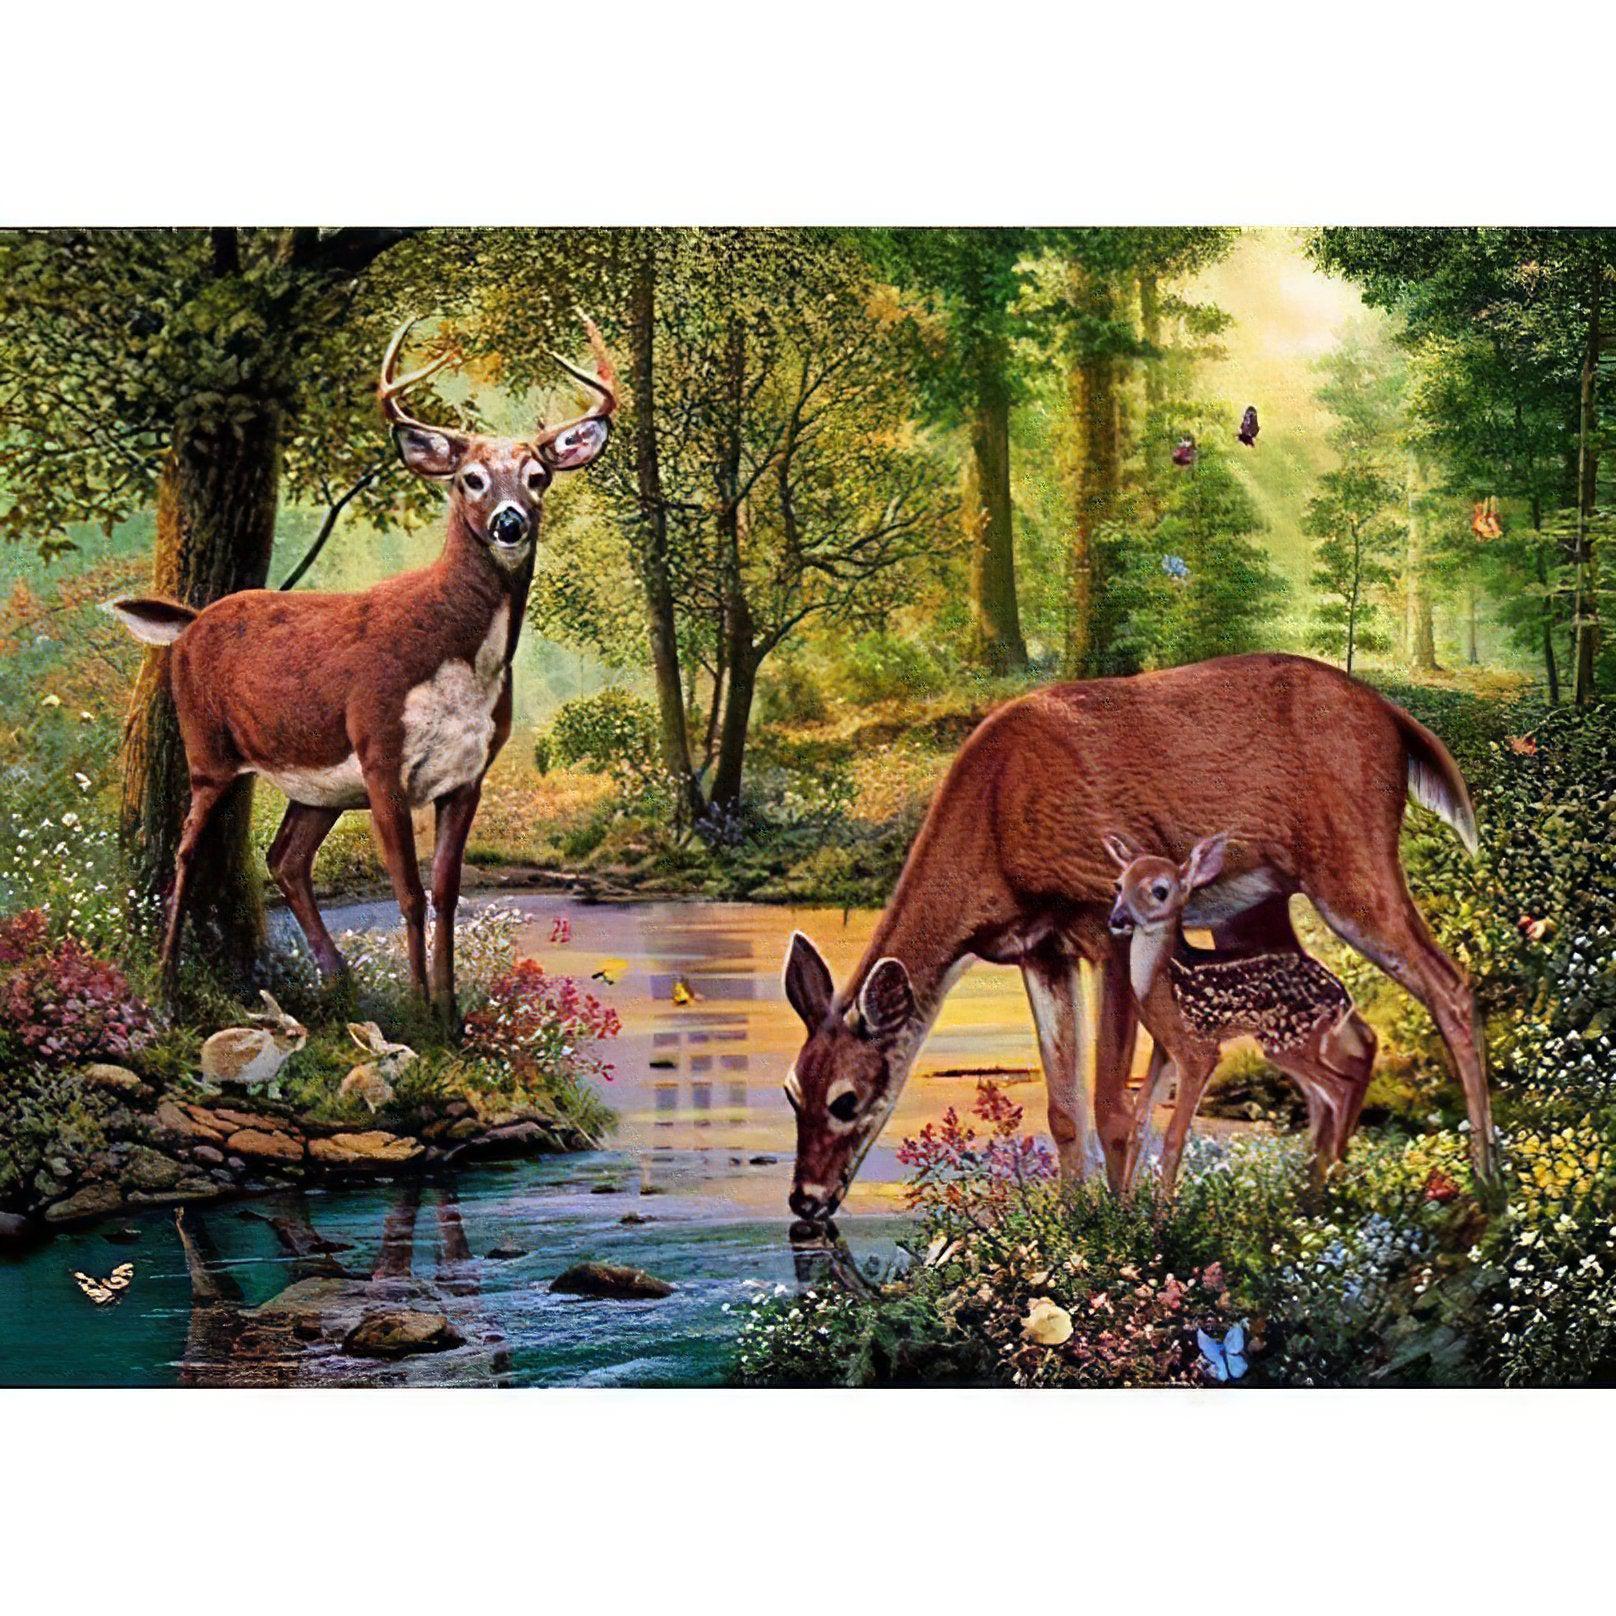 Serene Deer In The Forest painting.Deer In The Forest - Diamondartlove